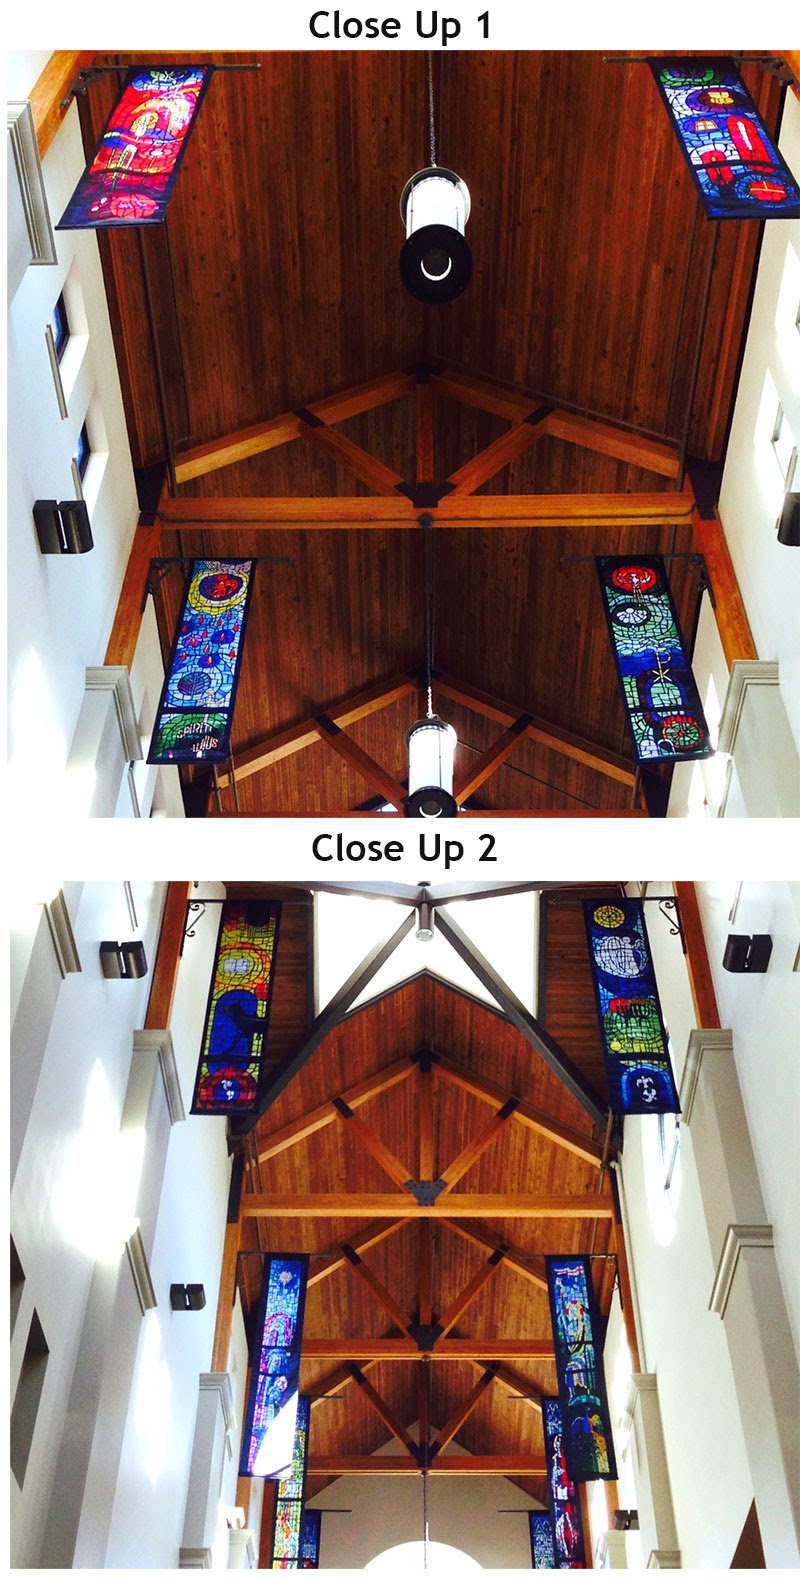 Custom Stained Glass Banners from PraiseBaners